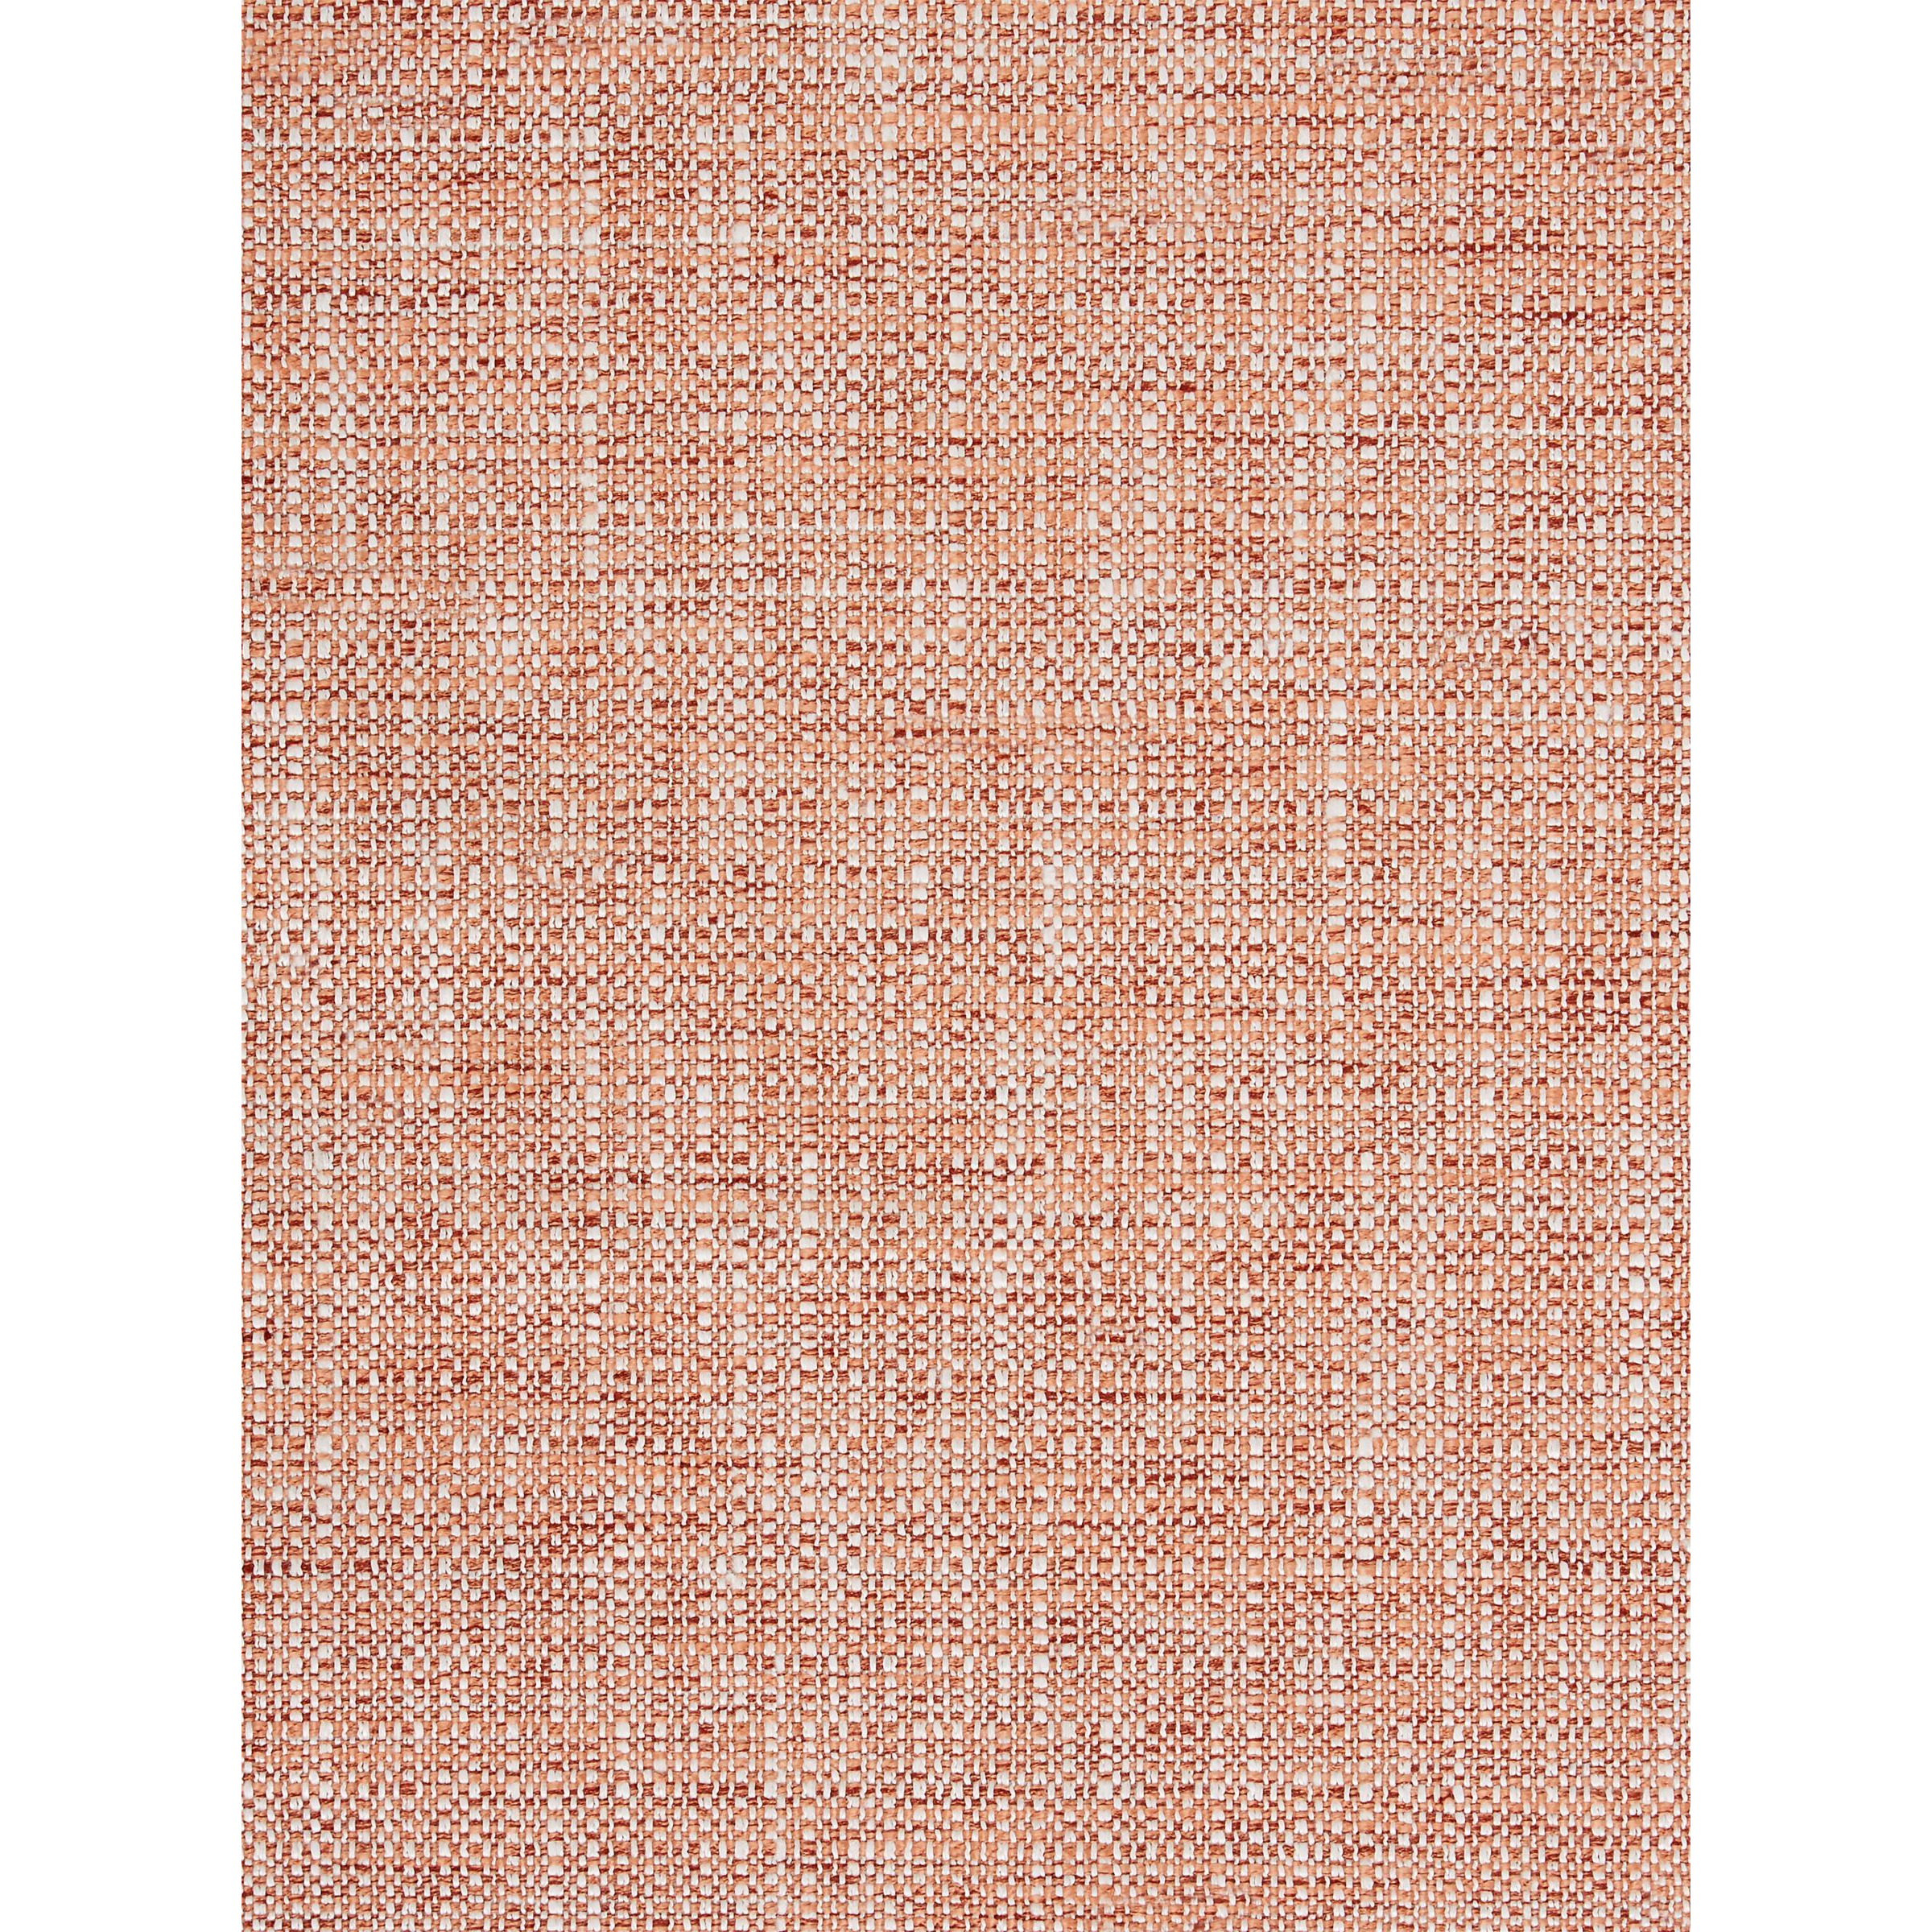 John Lewis Tonal Weave Made to Measure Curtains or Roman Blind, Chestnut - image 1